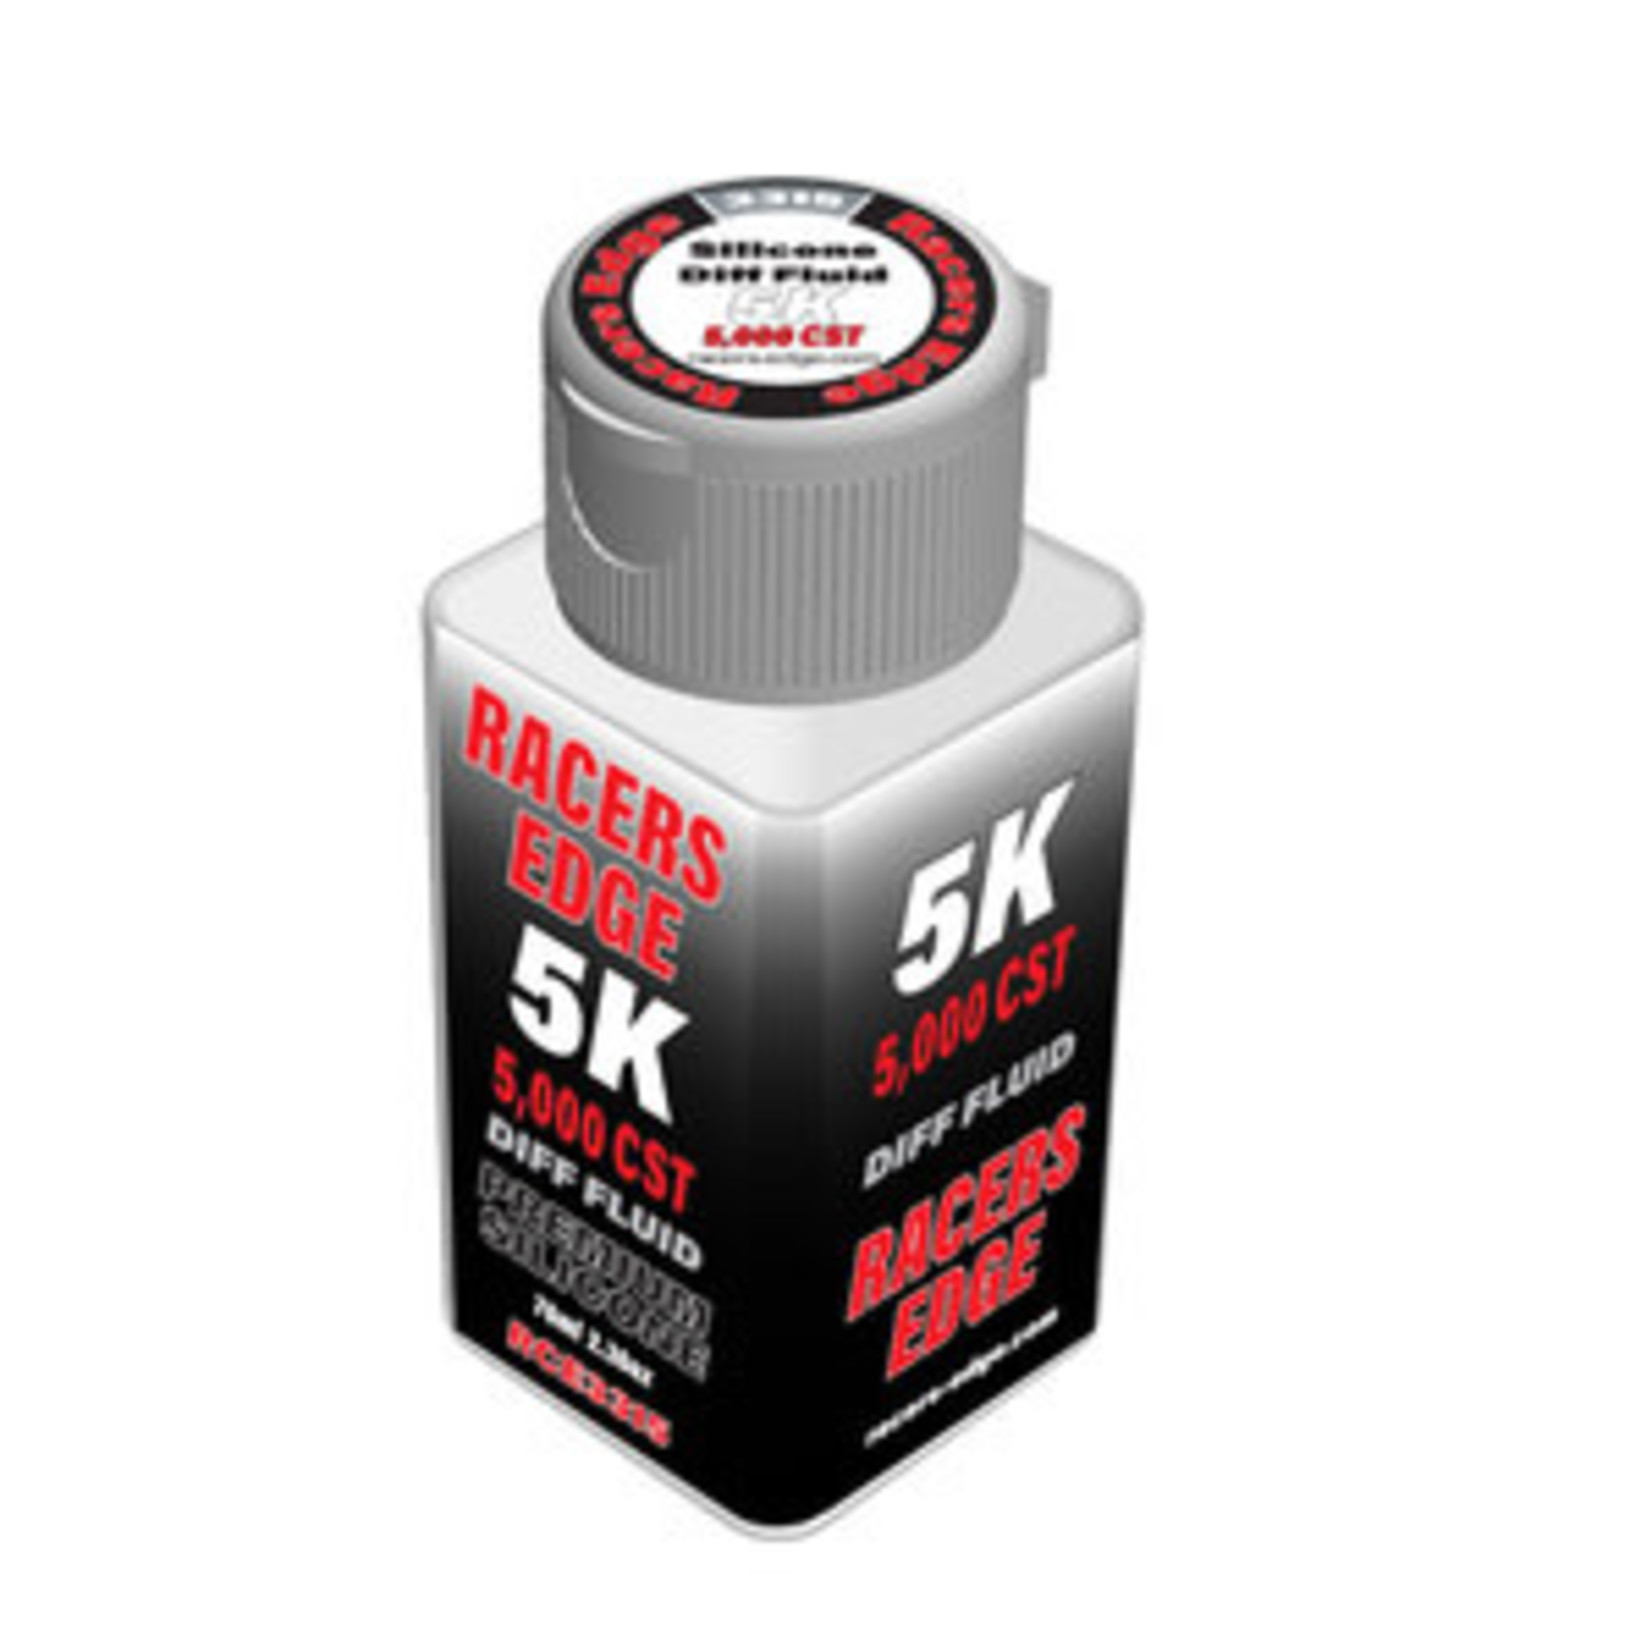 Racers Edge 5,000cSt 70ml 2.36oz Pure Silicone Diff Fluid